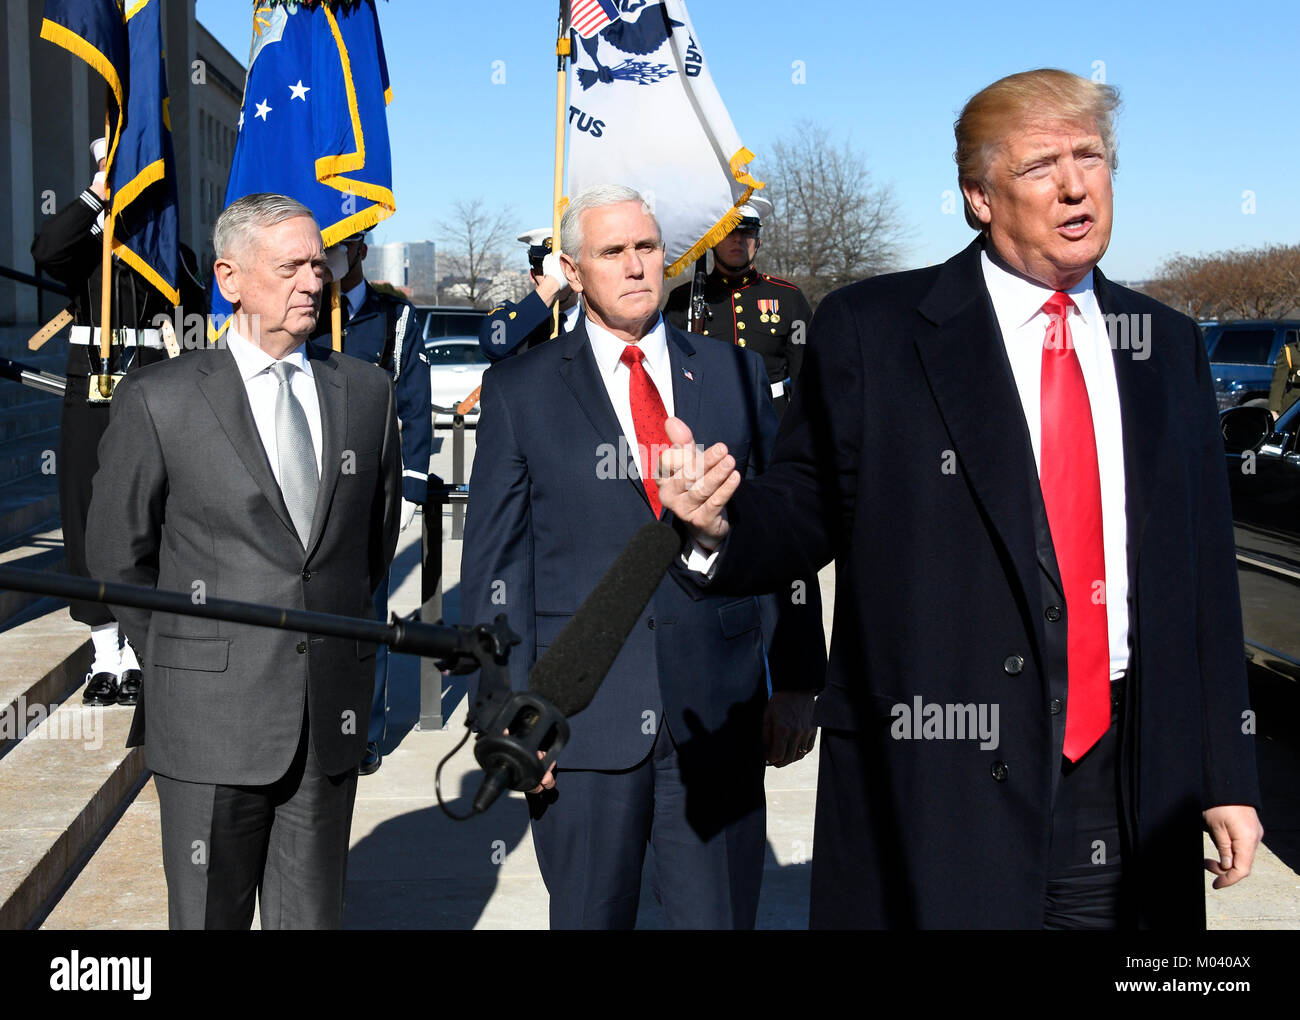 United States President Donald J. Trump makes a statement prior to going into the Pentagon in Washington, DC for meetings on Thursday, January 18, 2018. Looking on from left are US Secretary of Defense Jim Mattis and US Vice President Mike Pence. Credit: Ron Sachs/Pool via CNP /MediaPunch Stock Photo